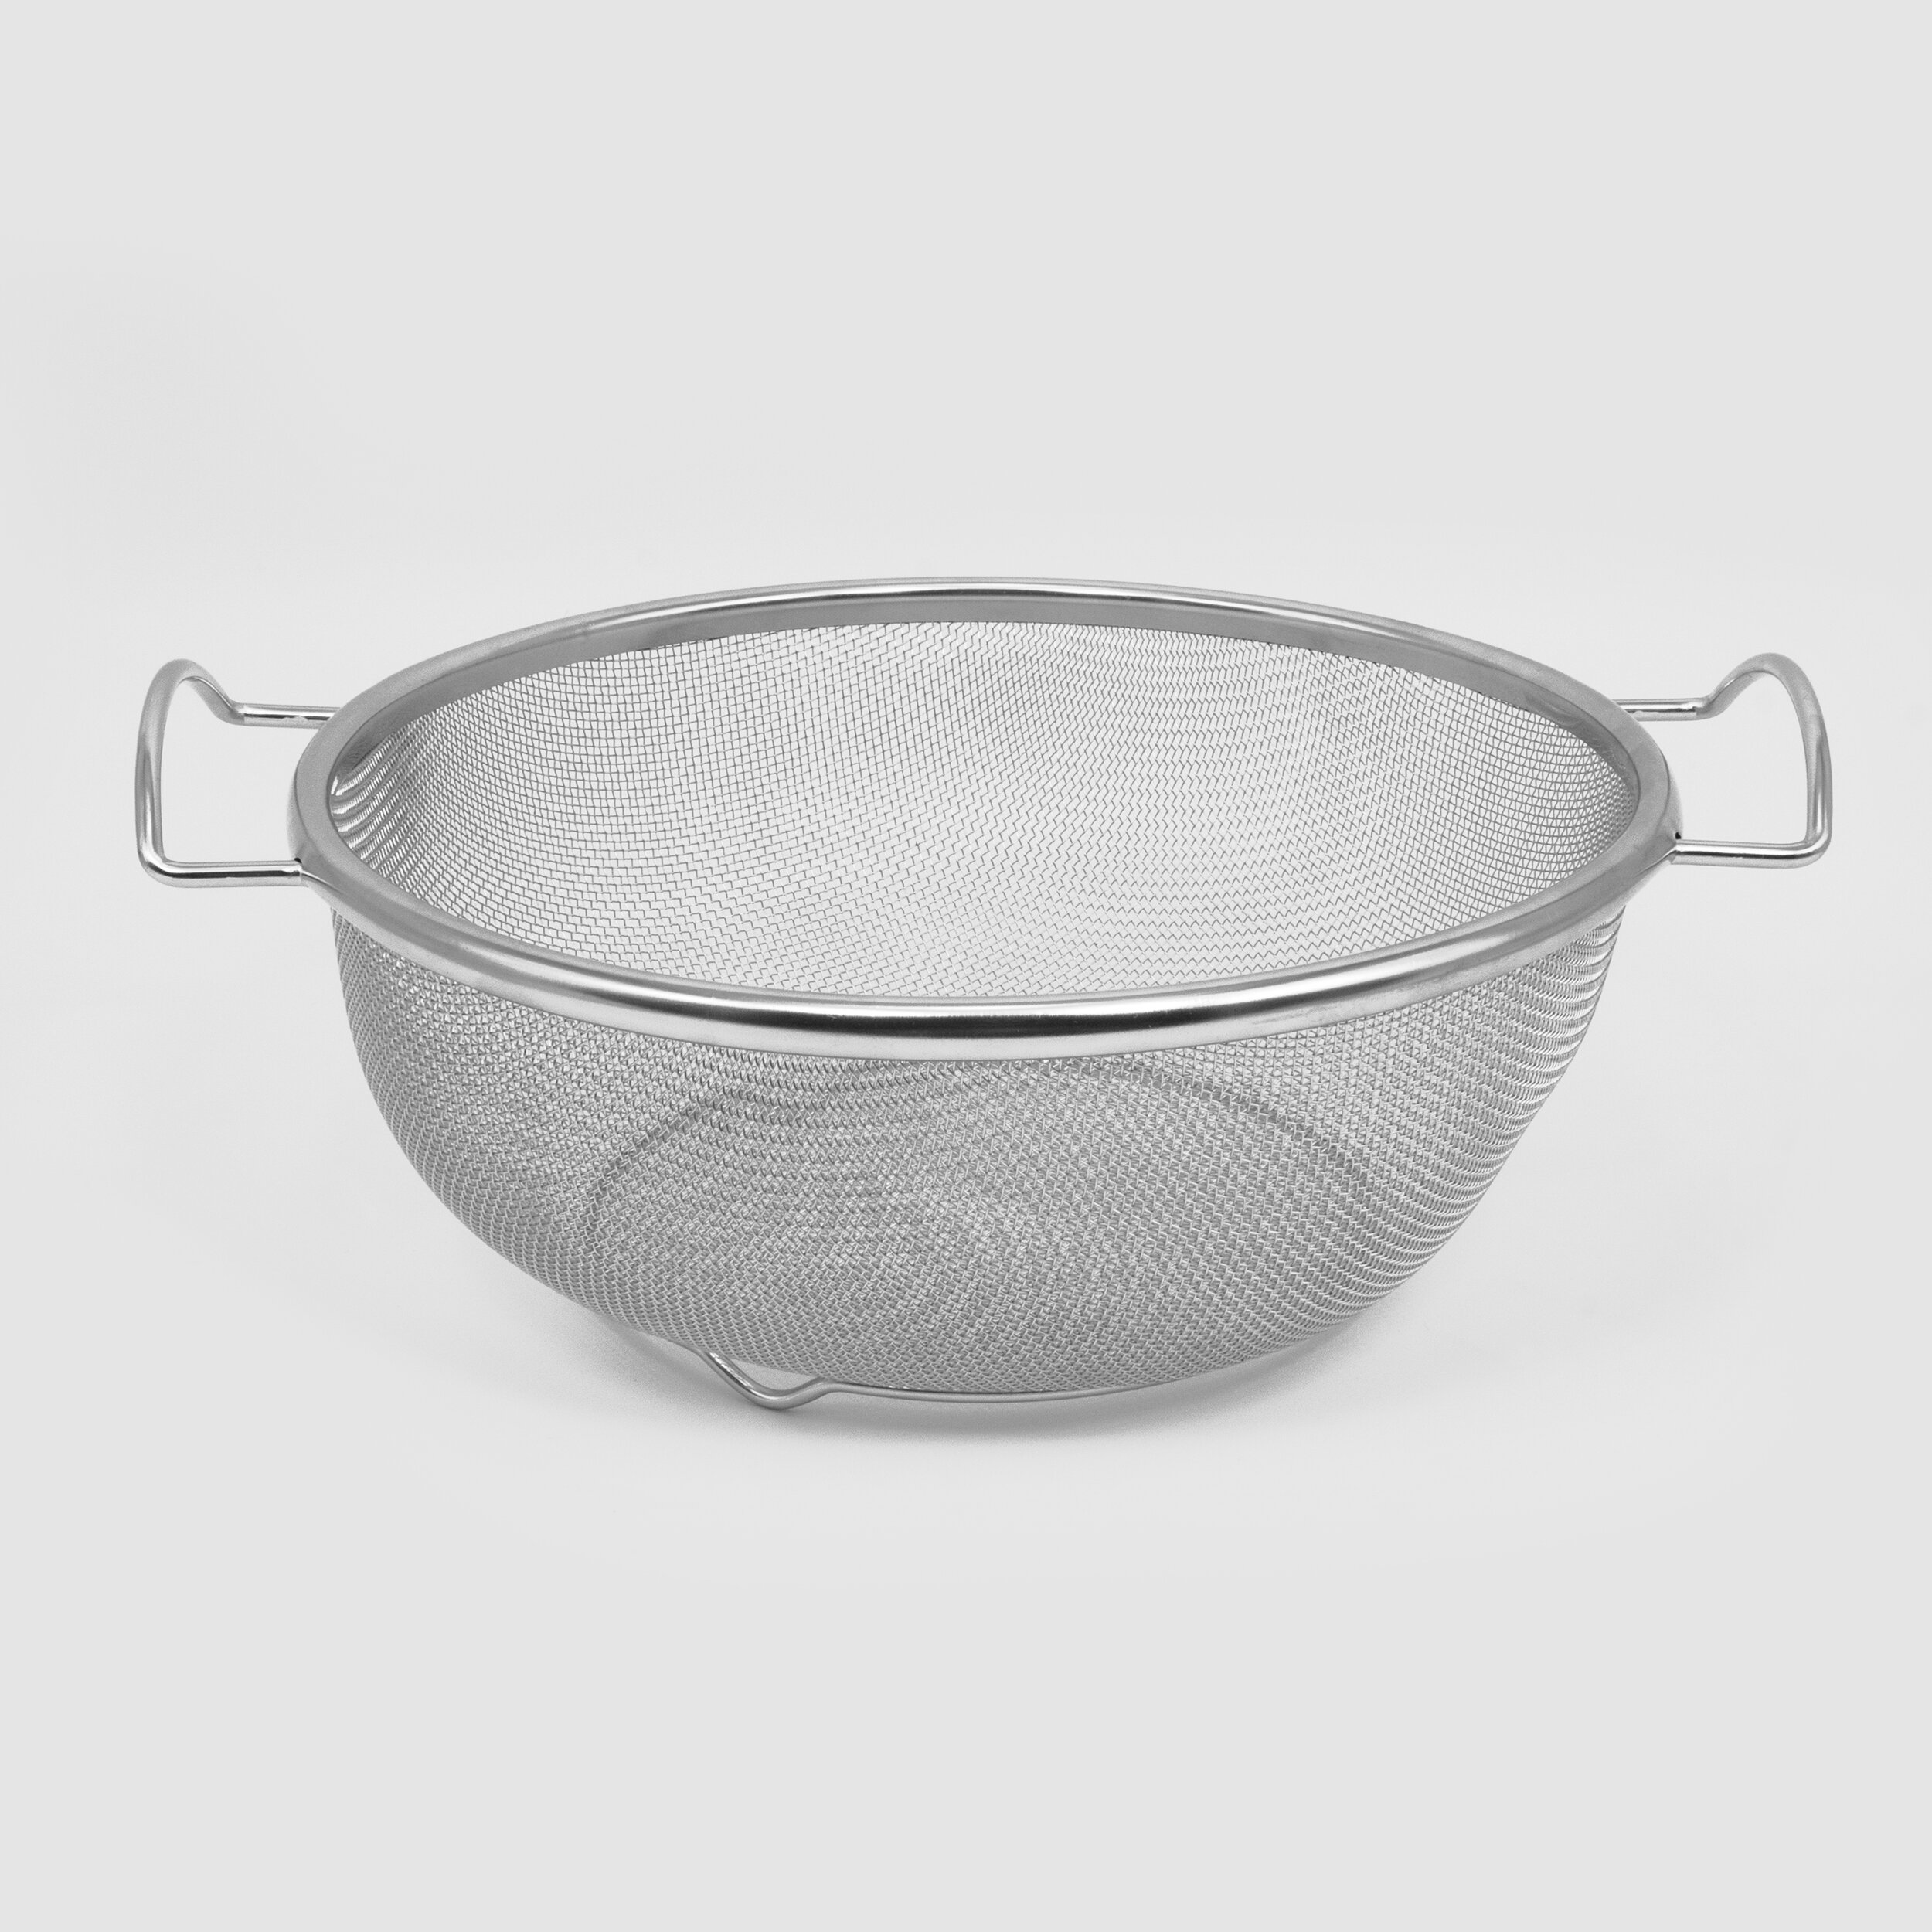  KitchenAid Expandable Stainless Steel Colander, One